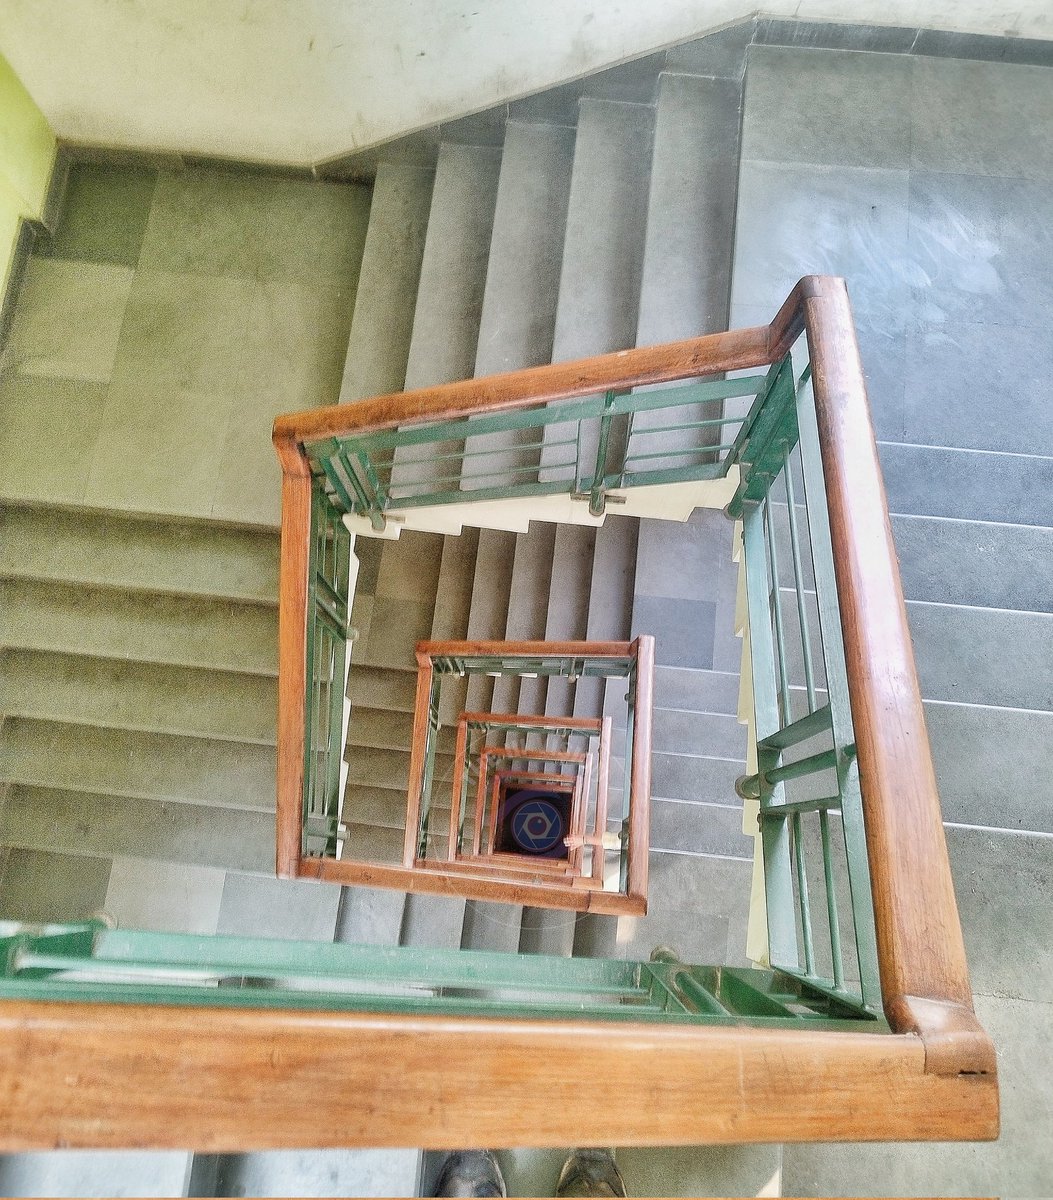 There is NO Elevator to success.,,You have to take the stairs step by step.   #staircase #squarstair #collegelife #collegedesign #StairwayStories #stairwalkers #MysteryUnveiled #architecture #architecturedesign @architectanddesign #staircasedesign #designboom #stairdesign .